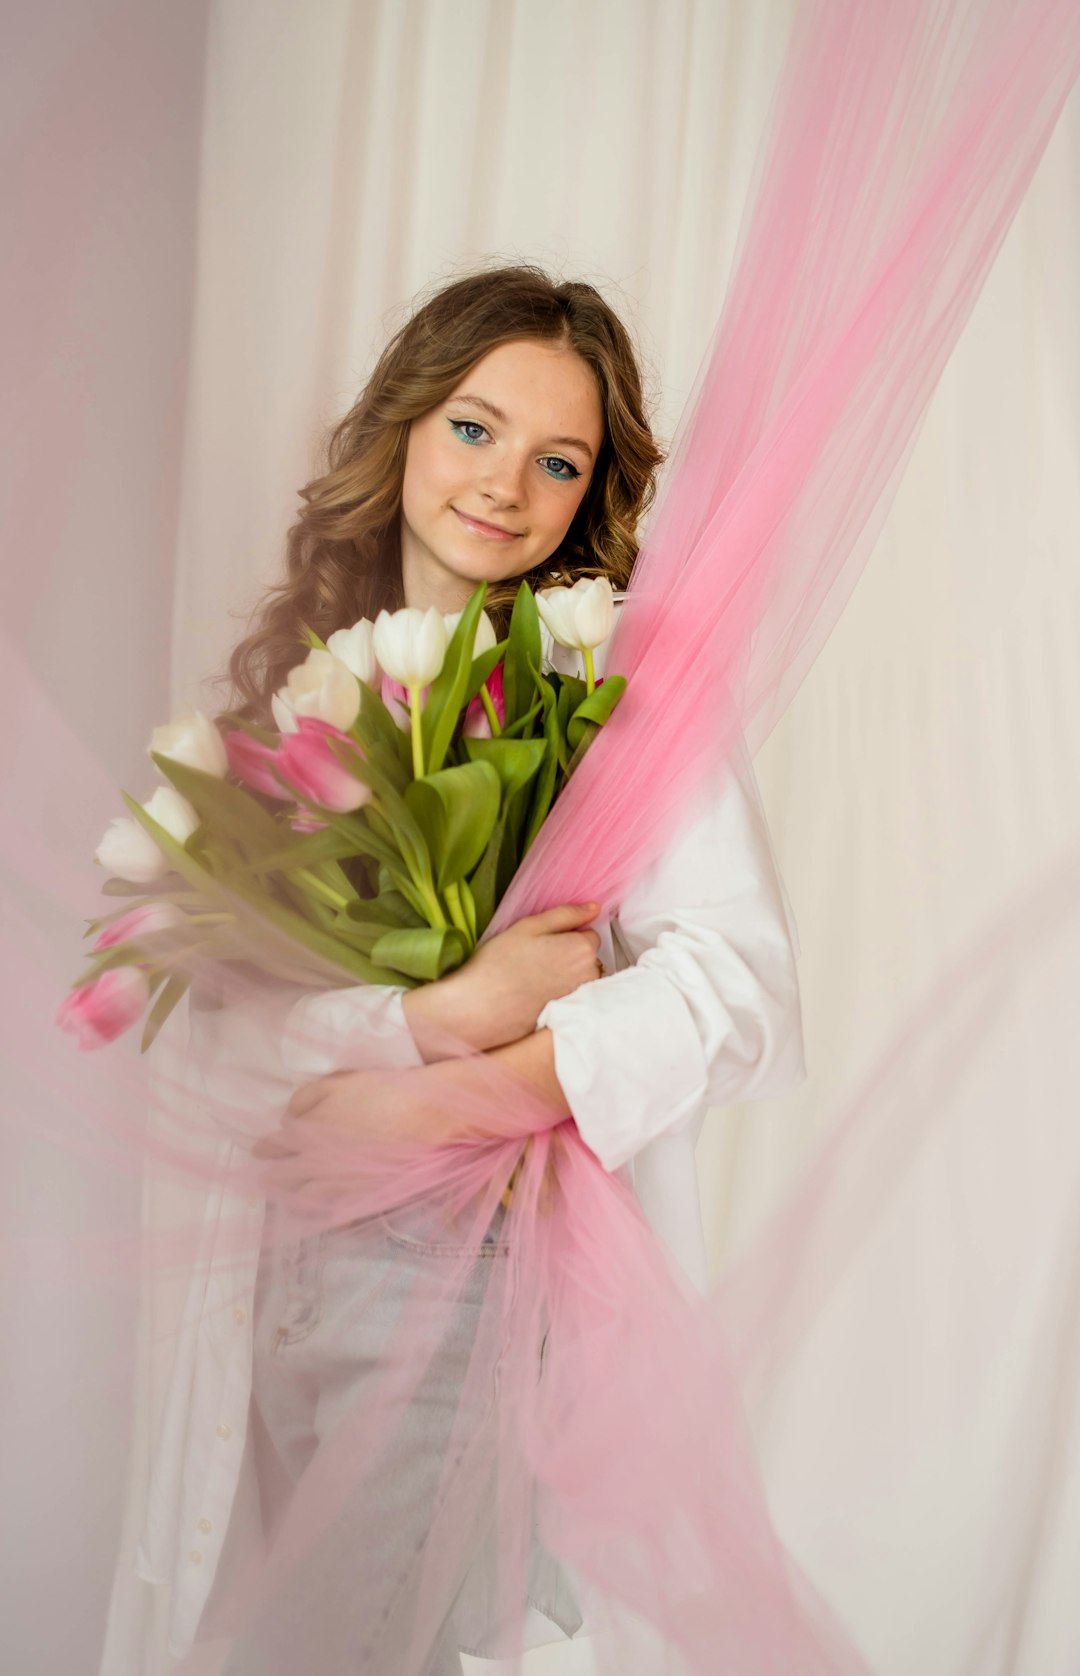 woman in white long sleeve shirt holding bouquet of flowers